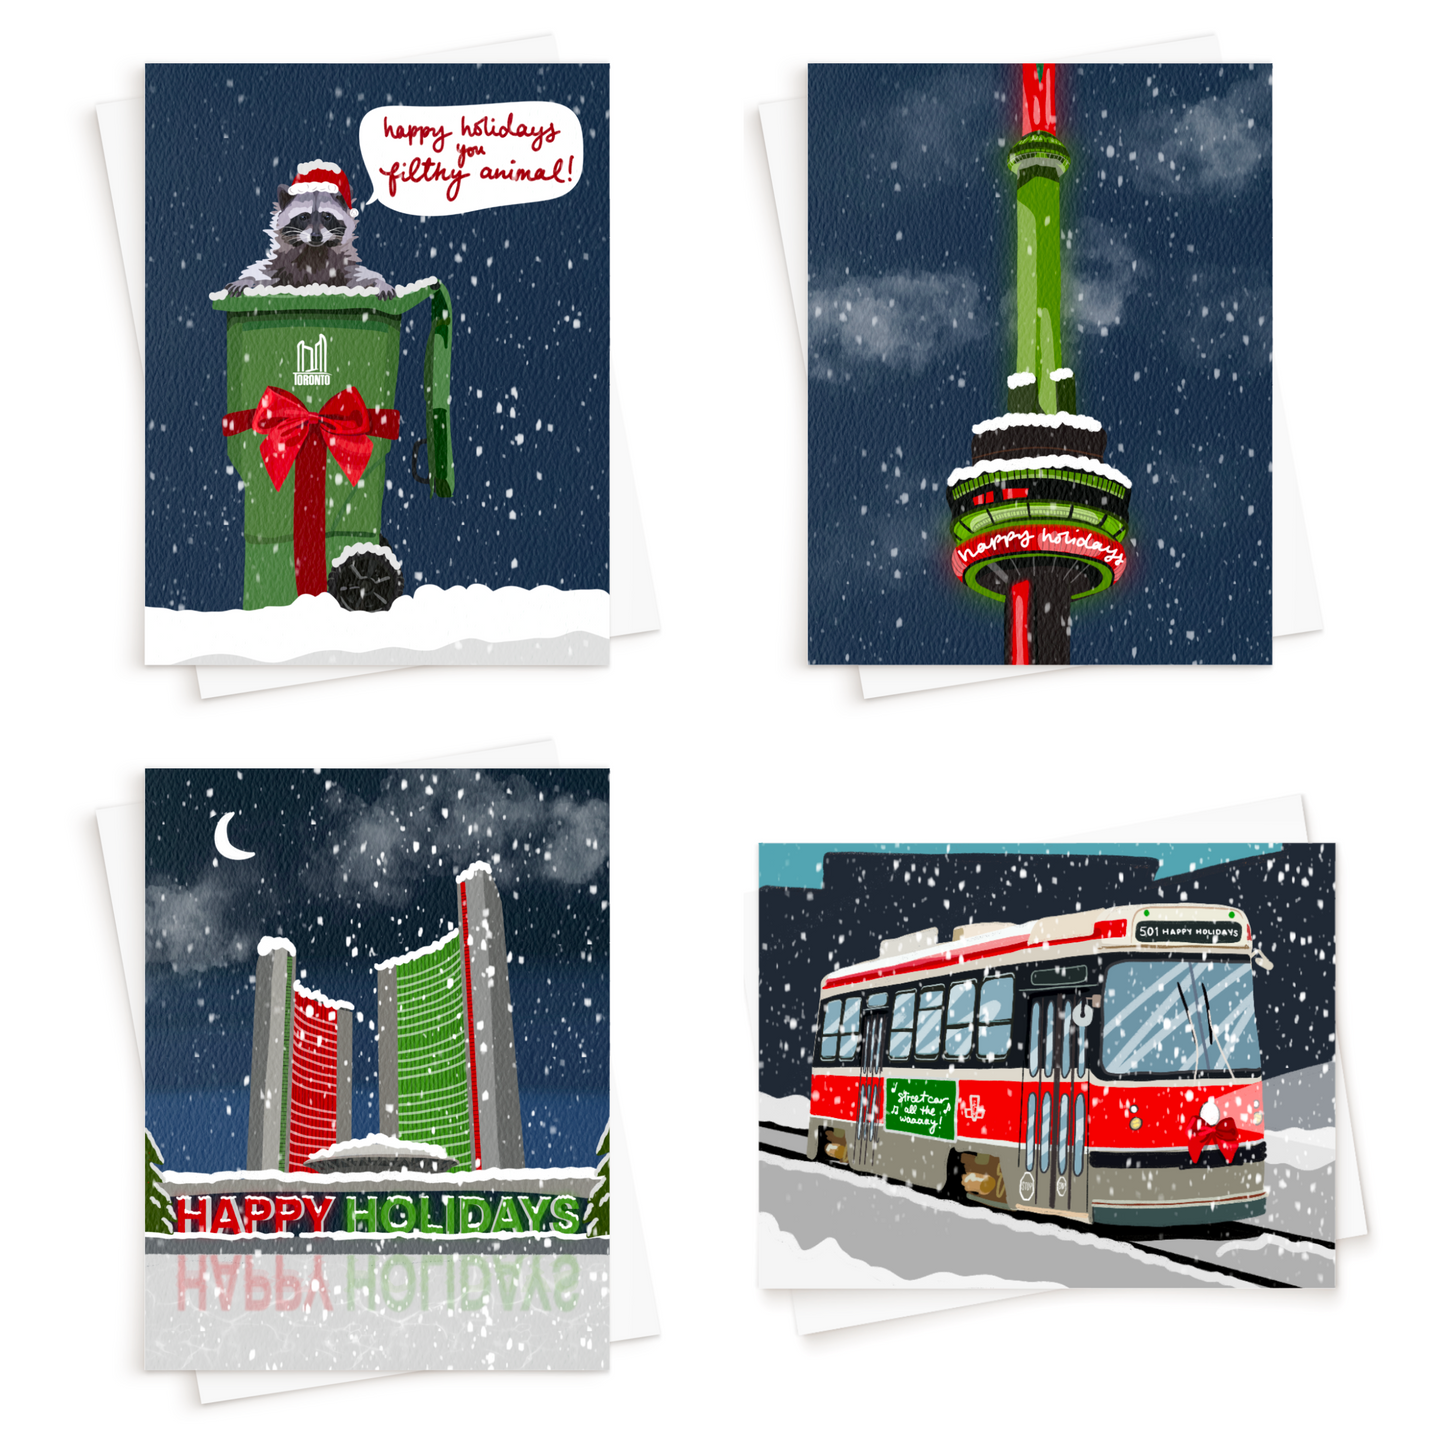 The Toronto Holiday 4-Pack